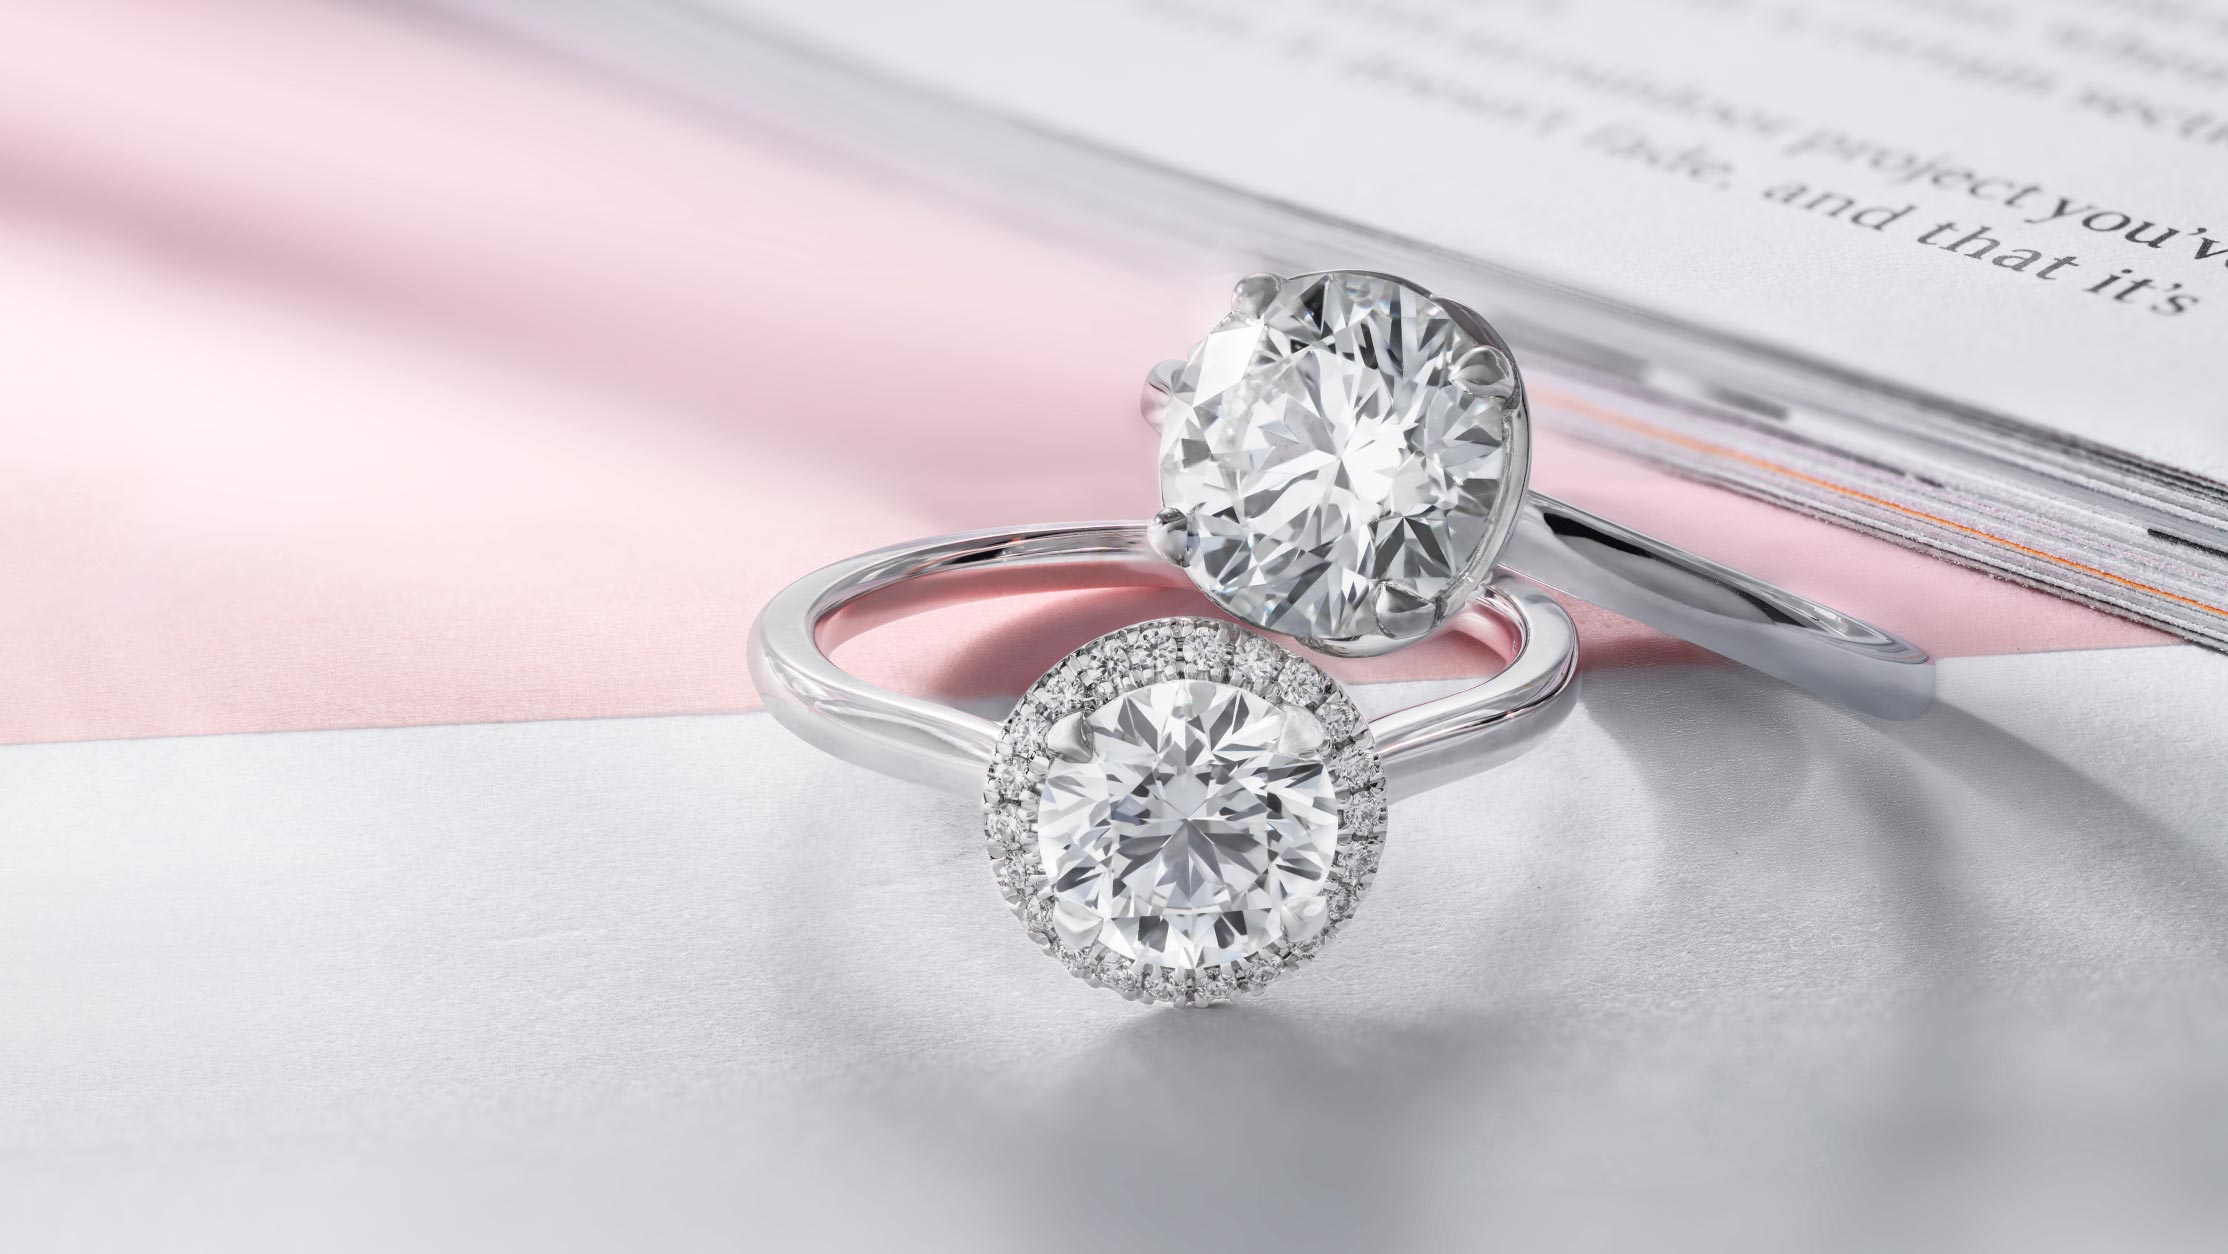 Halo and Solitaire engagement rings